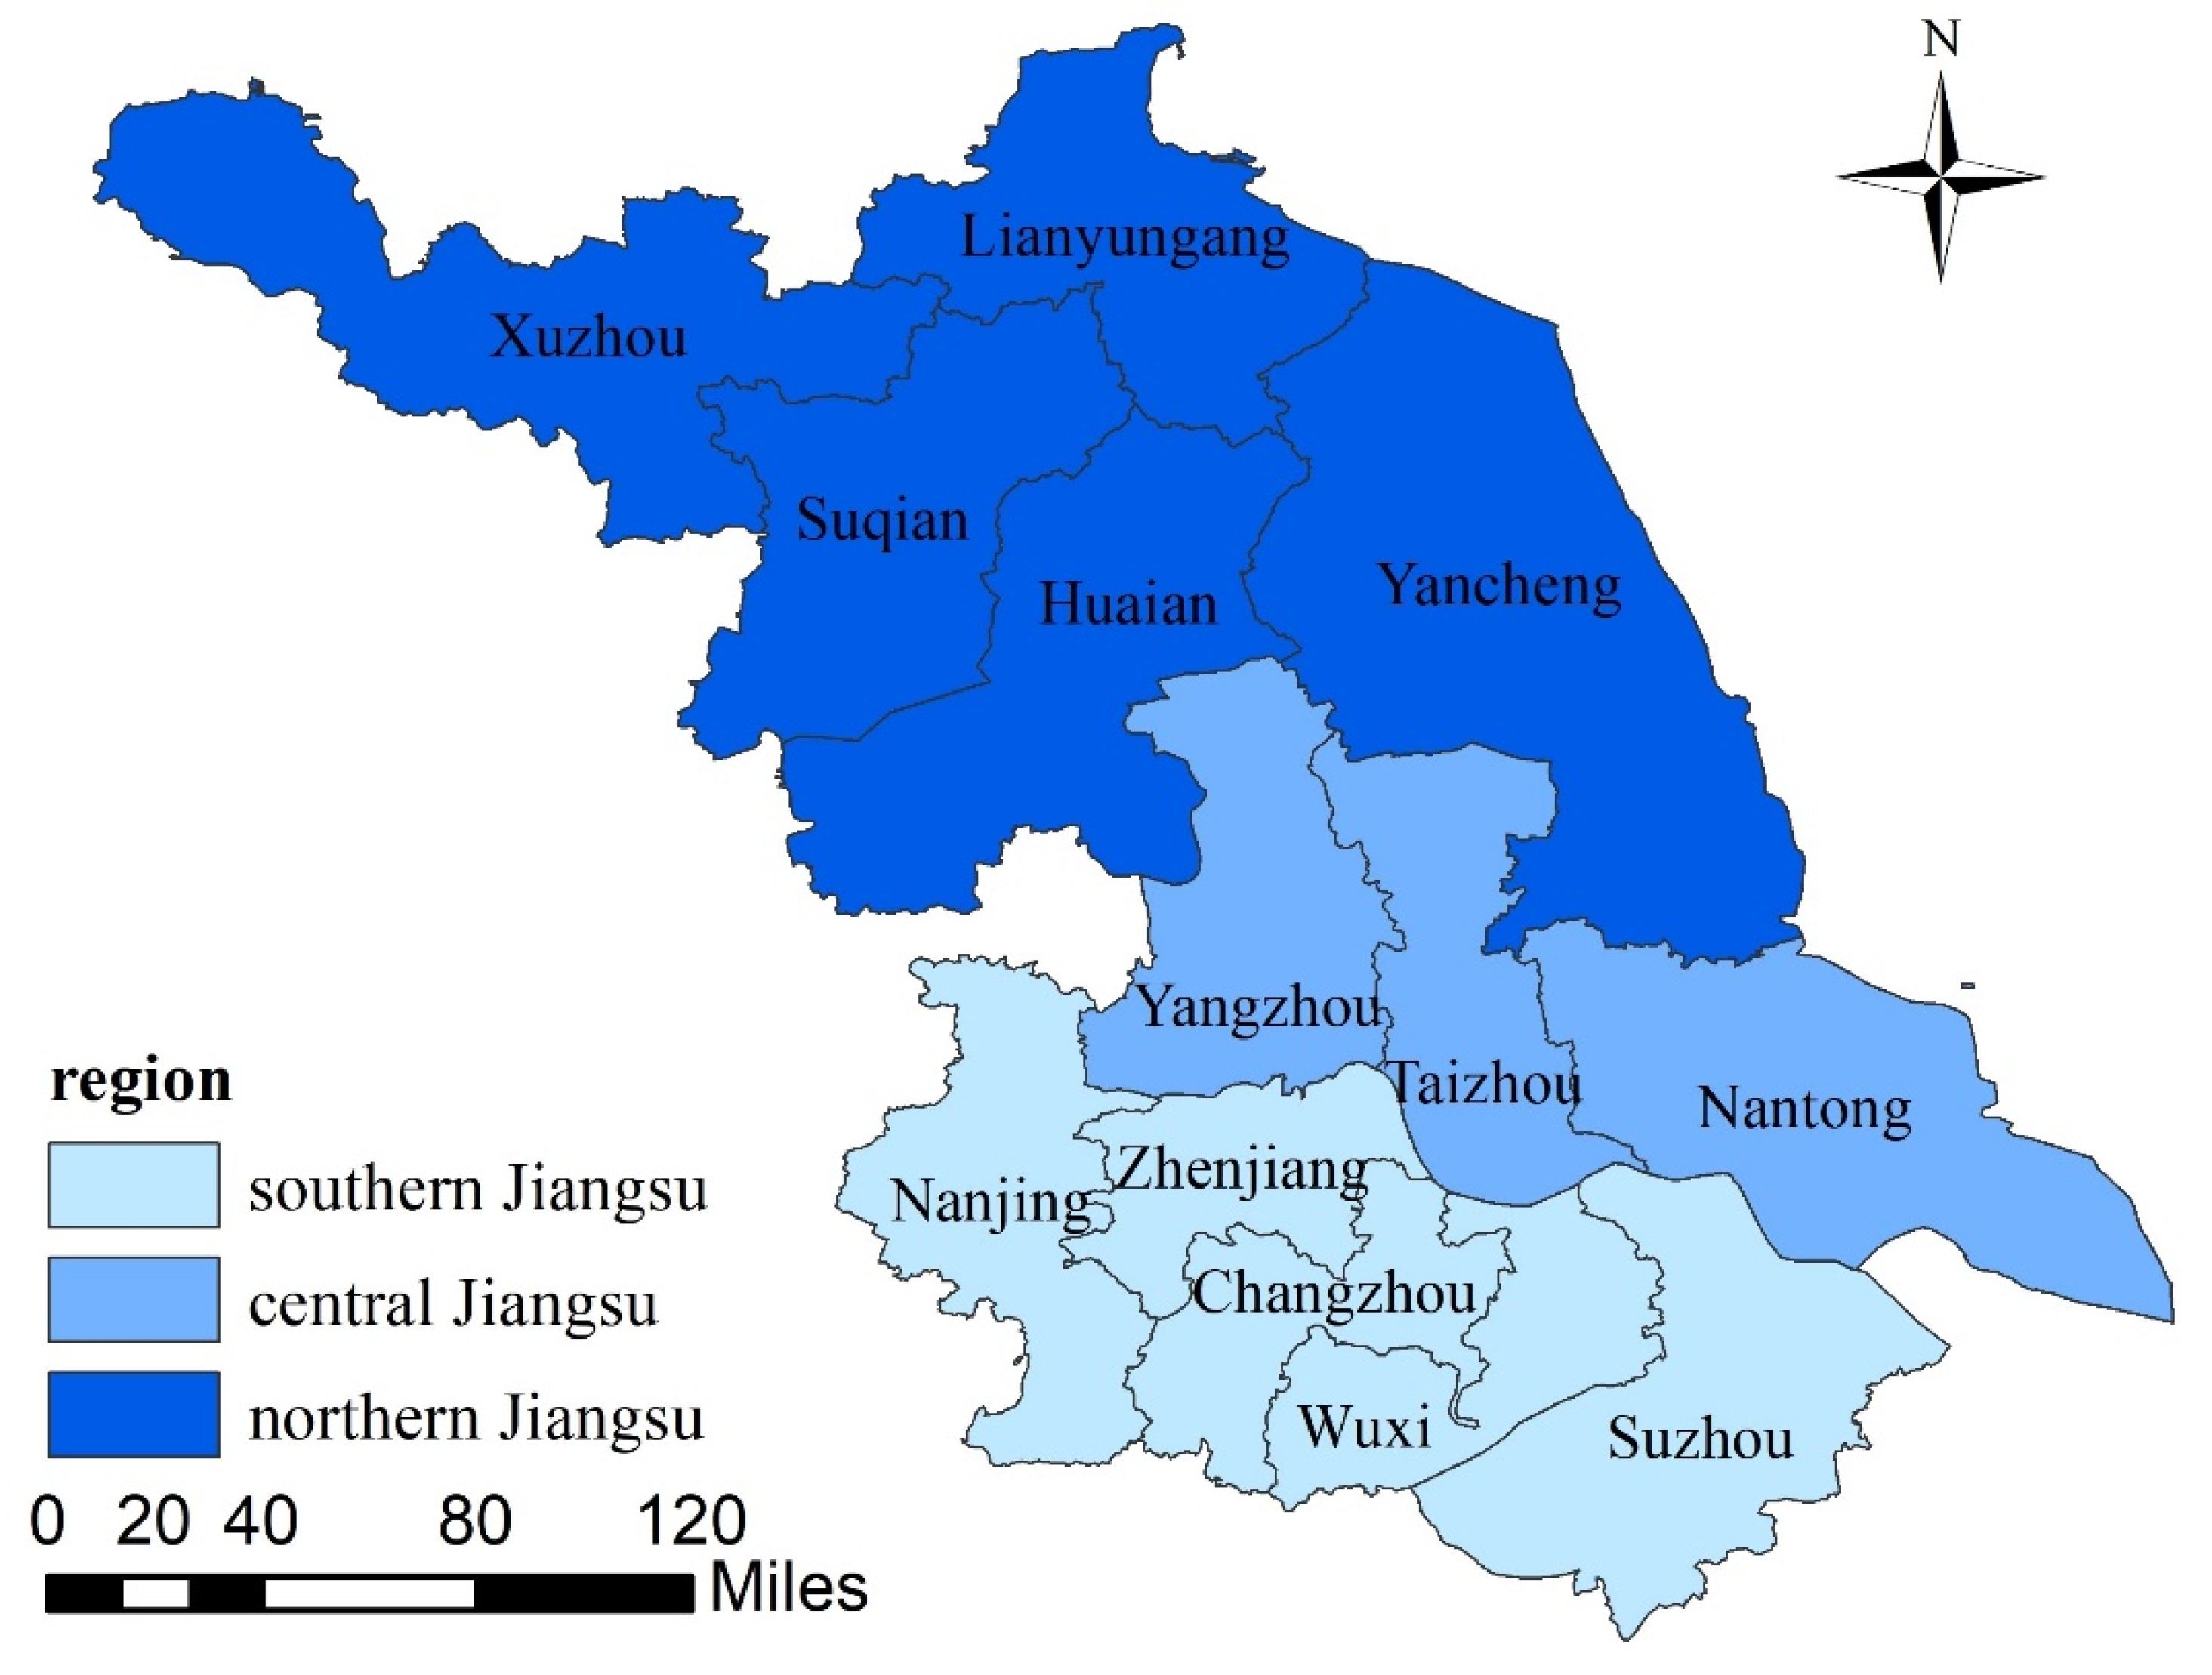 Frontiers  Estimating the efficiency of primary health care services and  its determinants: evidence from provincial panel data in China